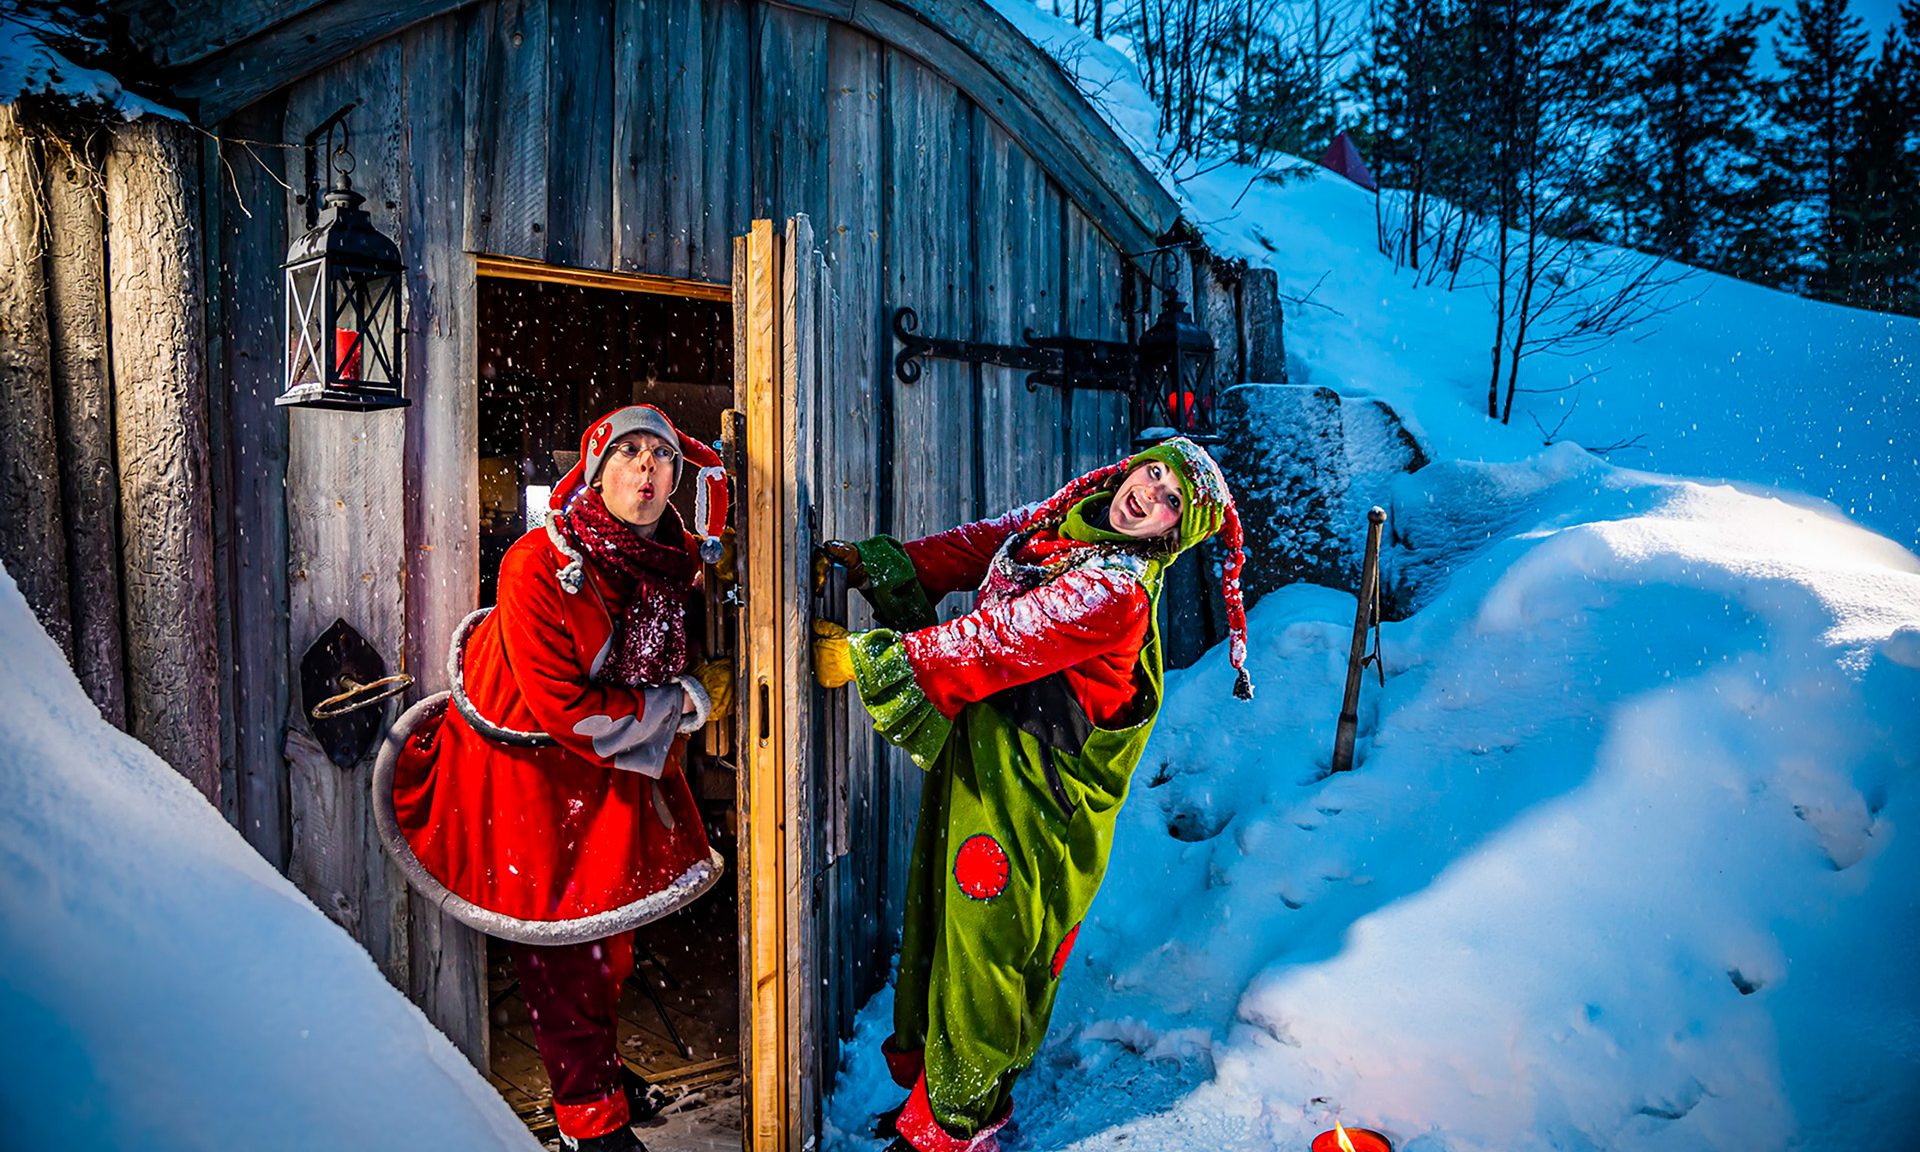 Elves in front of the Command Centre door at the Santa Claus Secret Forest.